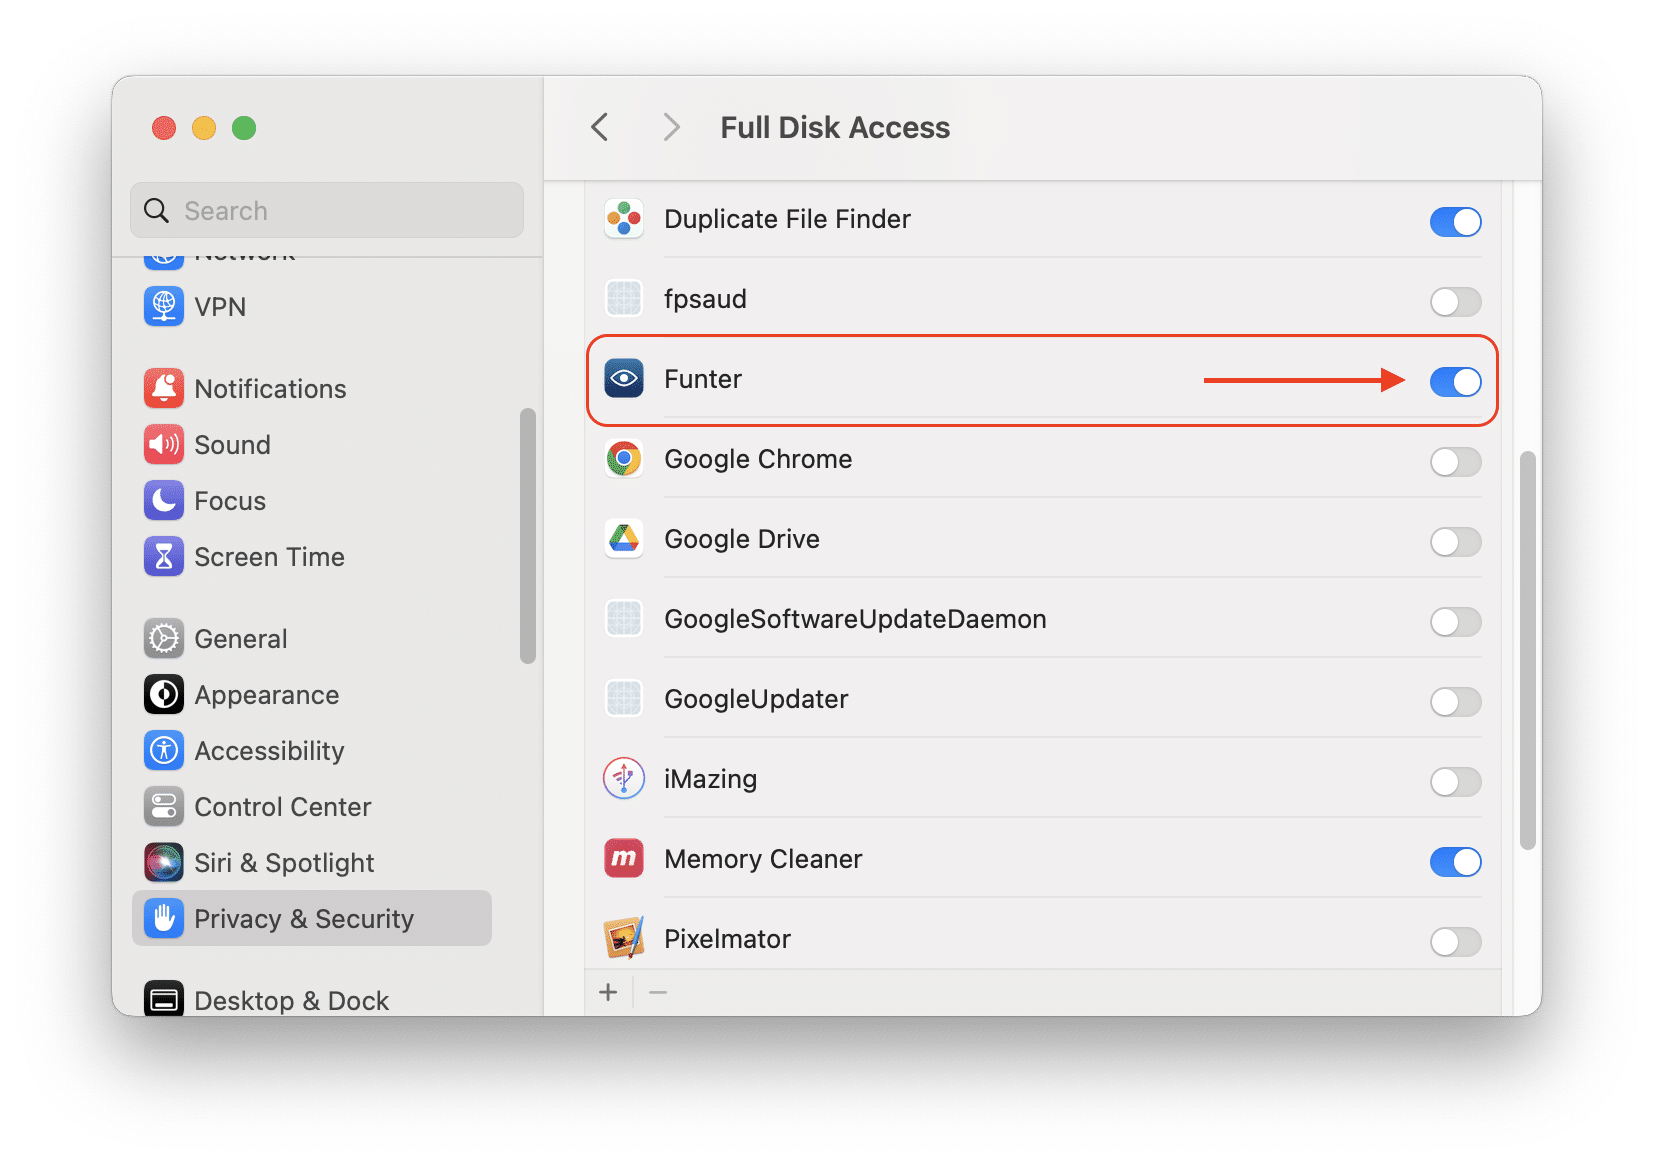 System Settings window showing access for Funter